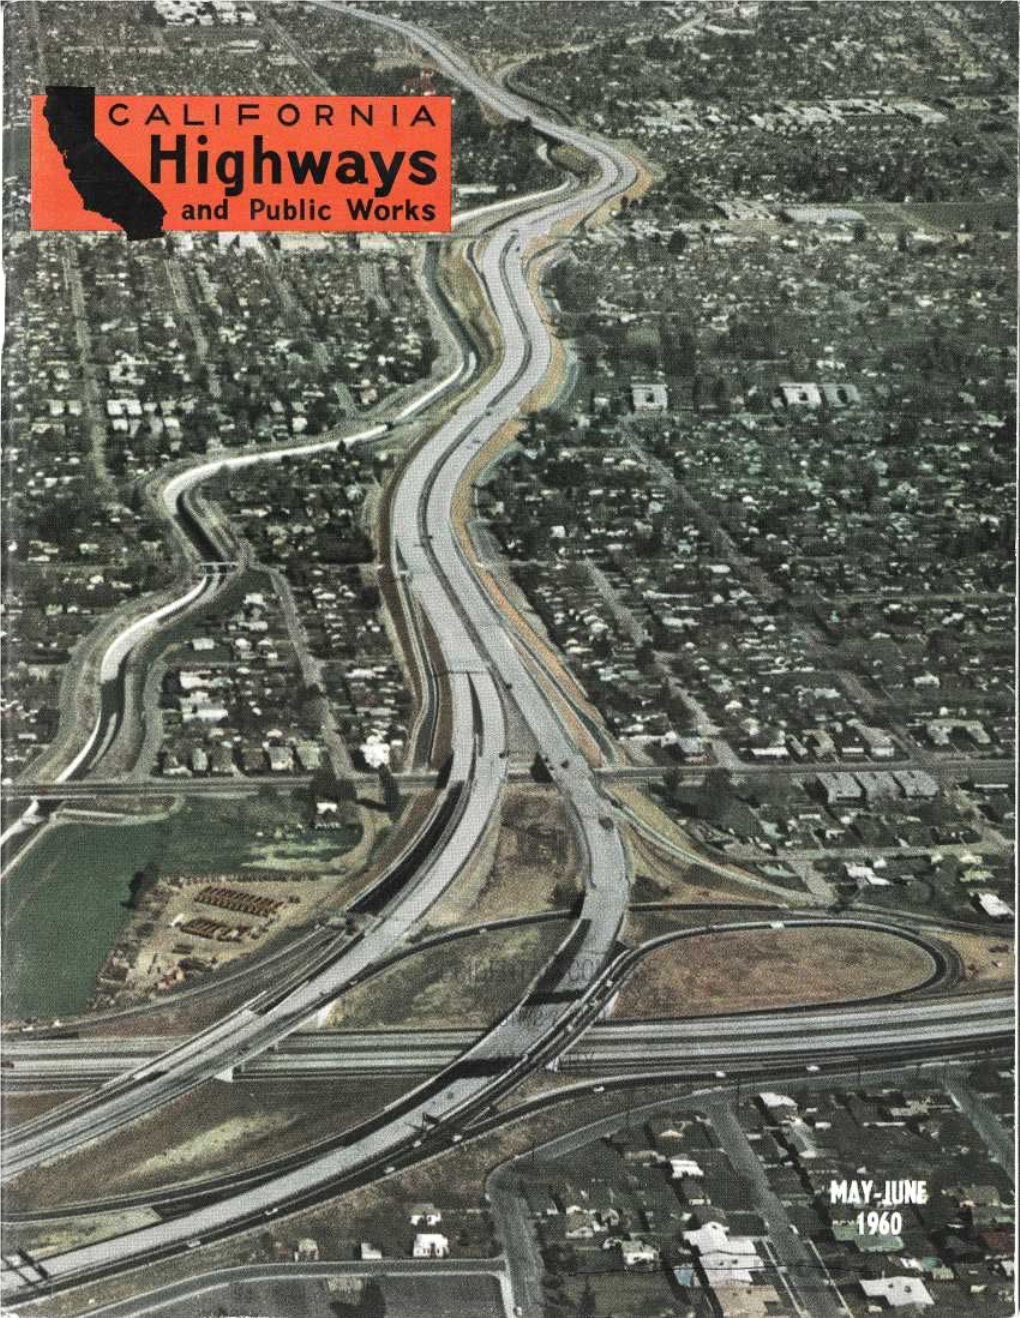 California Highways and Public Works, May-June 1960